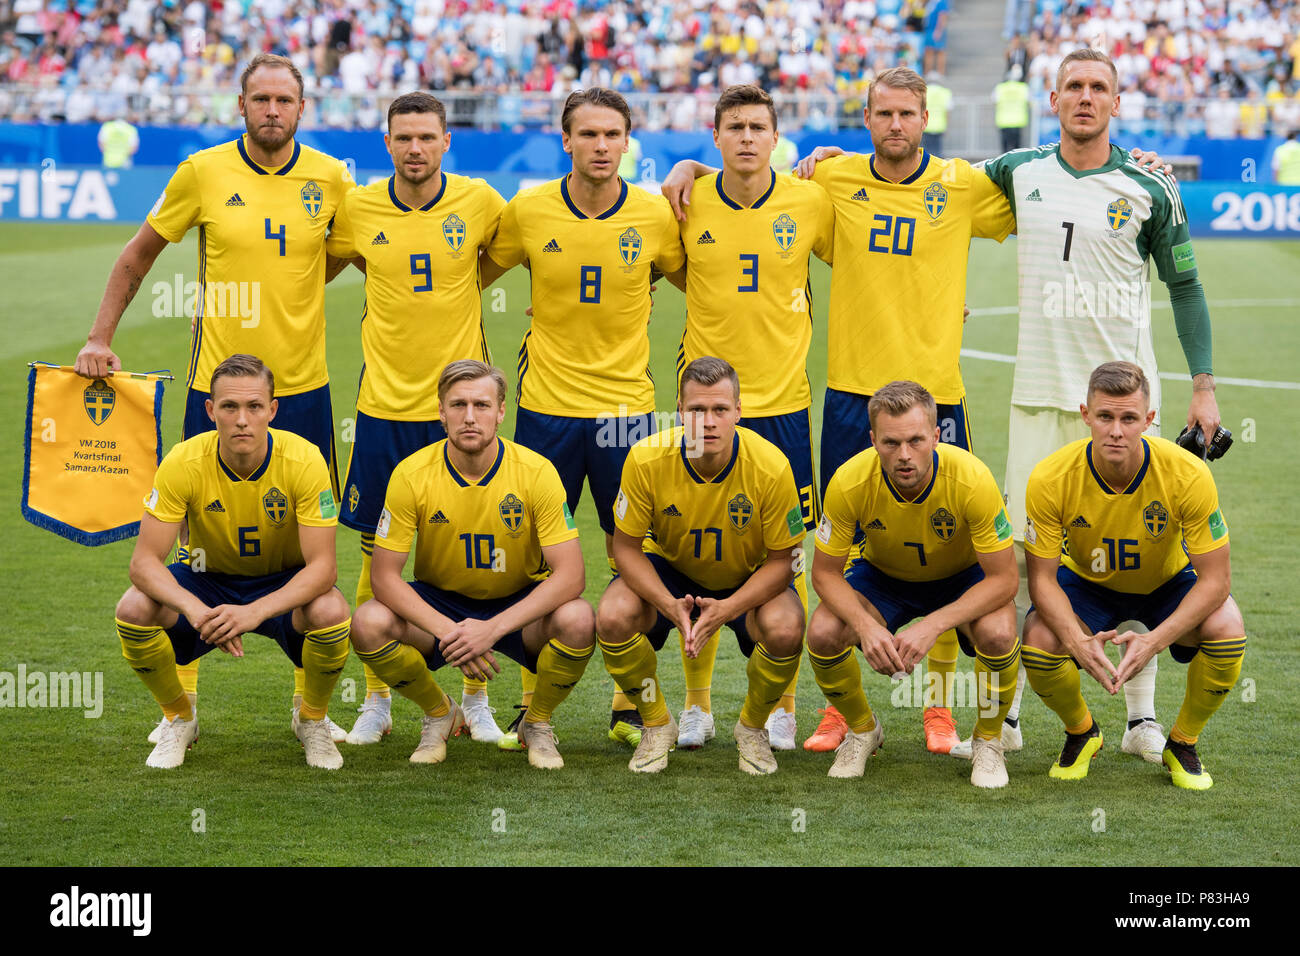 O.left to right Andreas GRANQVIST (SWE), Marcus BERG (SWE), Albin EKDAL (SWE), Victor LINDELOF (Lindelof, SWE), Ola TOIVONEN (SWE), goalie Robin OLSEN (SWE), URleft to right Martin OLSSON (SWE), Emil FORSBERG (SWE), Victor CLAESSON (SWE), Sebastian LARSSON (SWE), Emil KRAFTH (SWE), team picture, group picture, team picture, team picture, full figure, landscape, Sweden (SWE) - England (ENG) 0: 2, quarter-finals, match 60, on 07.07.2018 in Samara; Football World Cup 2018 in Russia from 14.06. - 15.07.2018. | usage worldwide Stock Photo